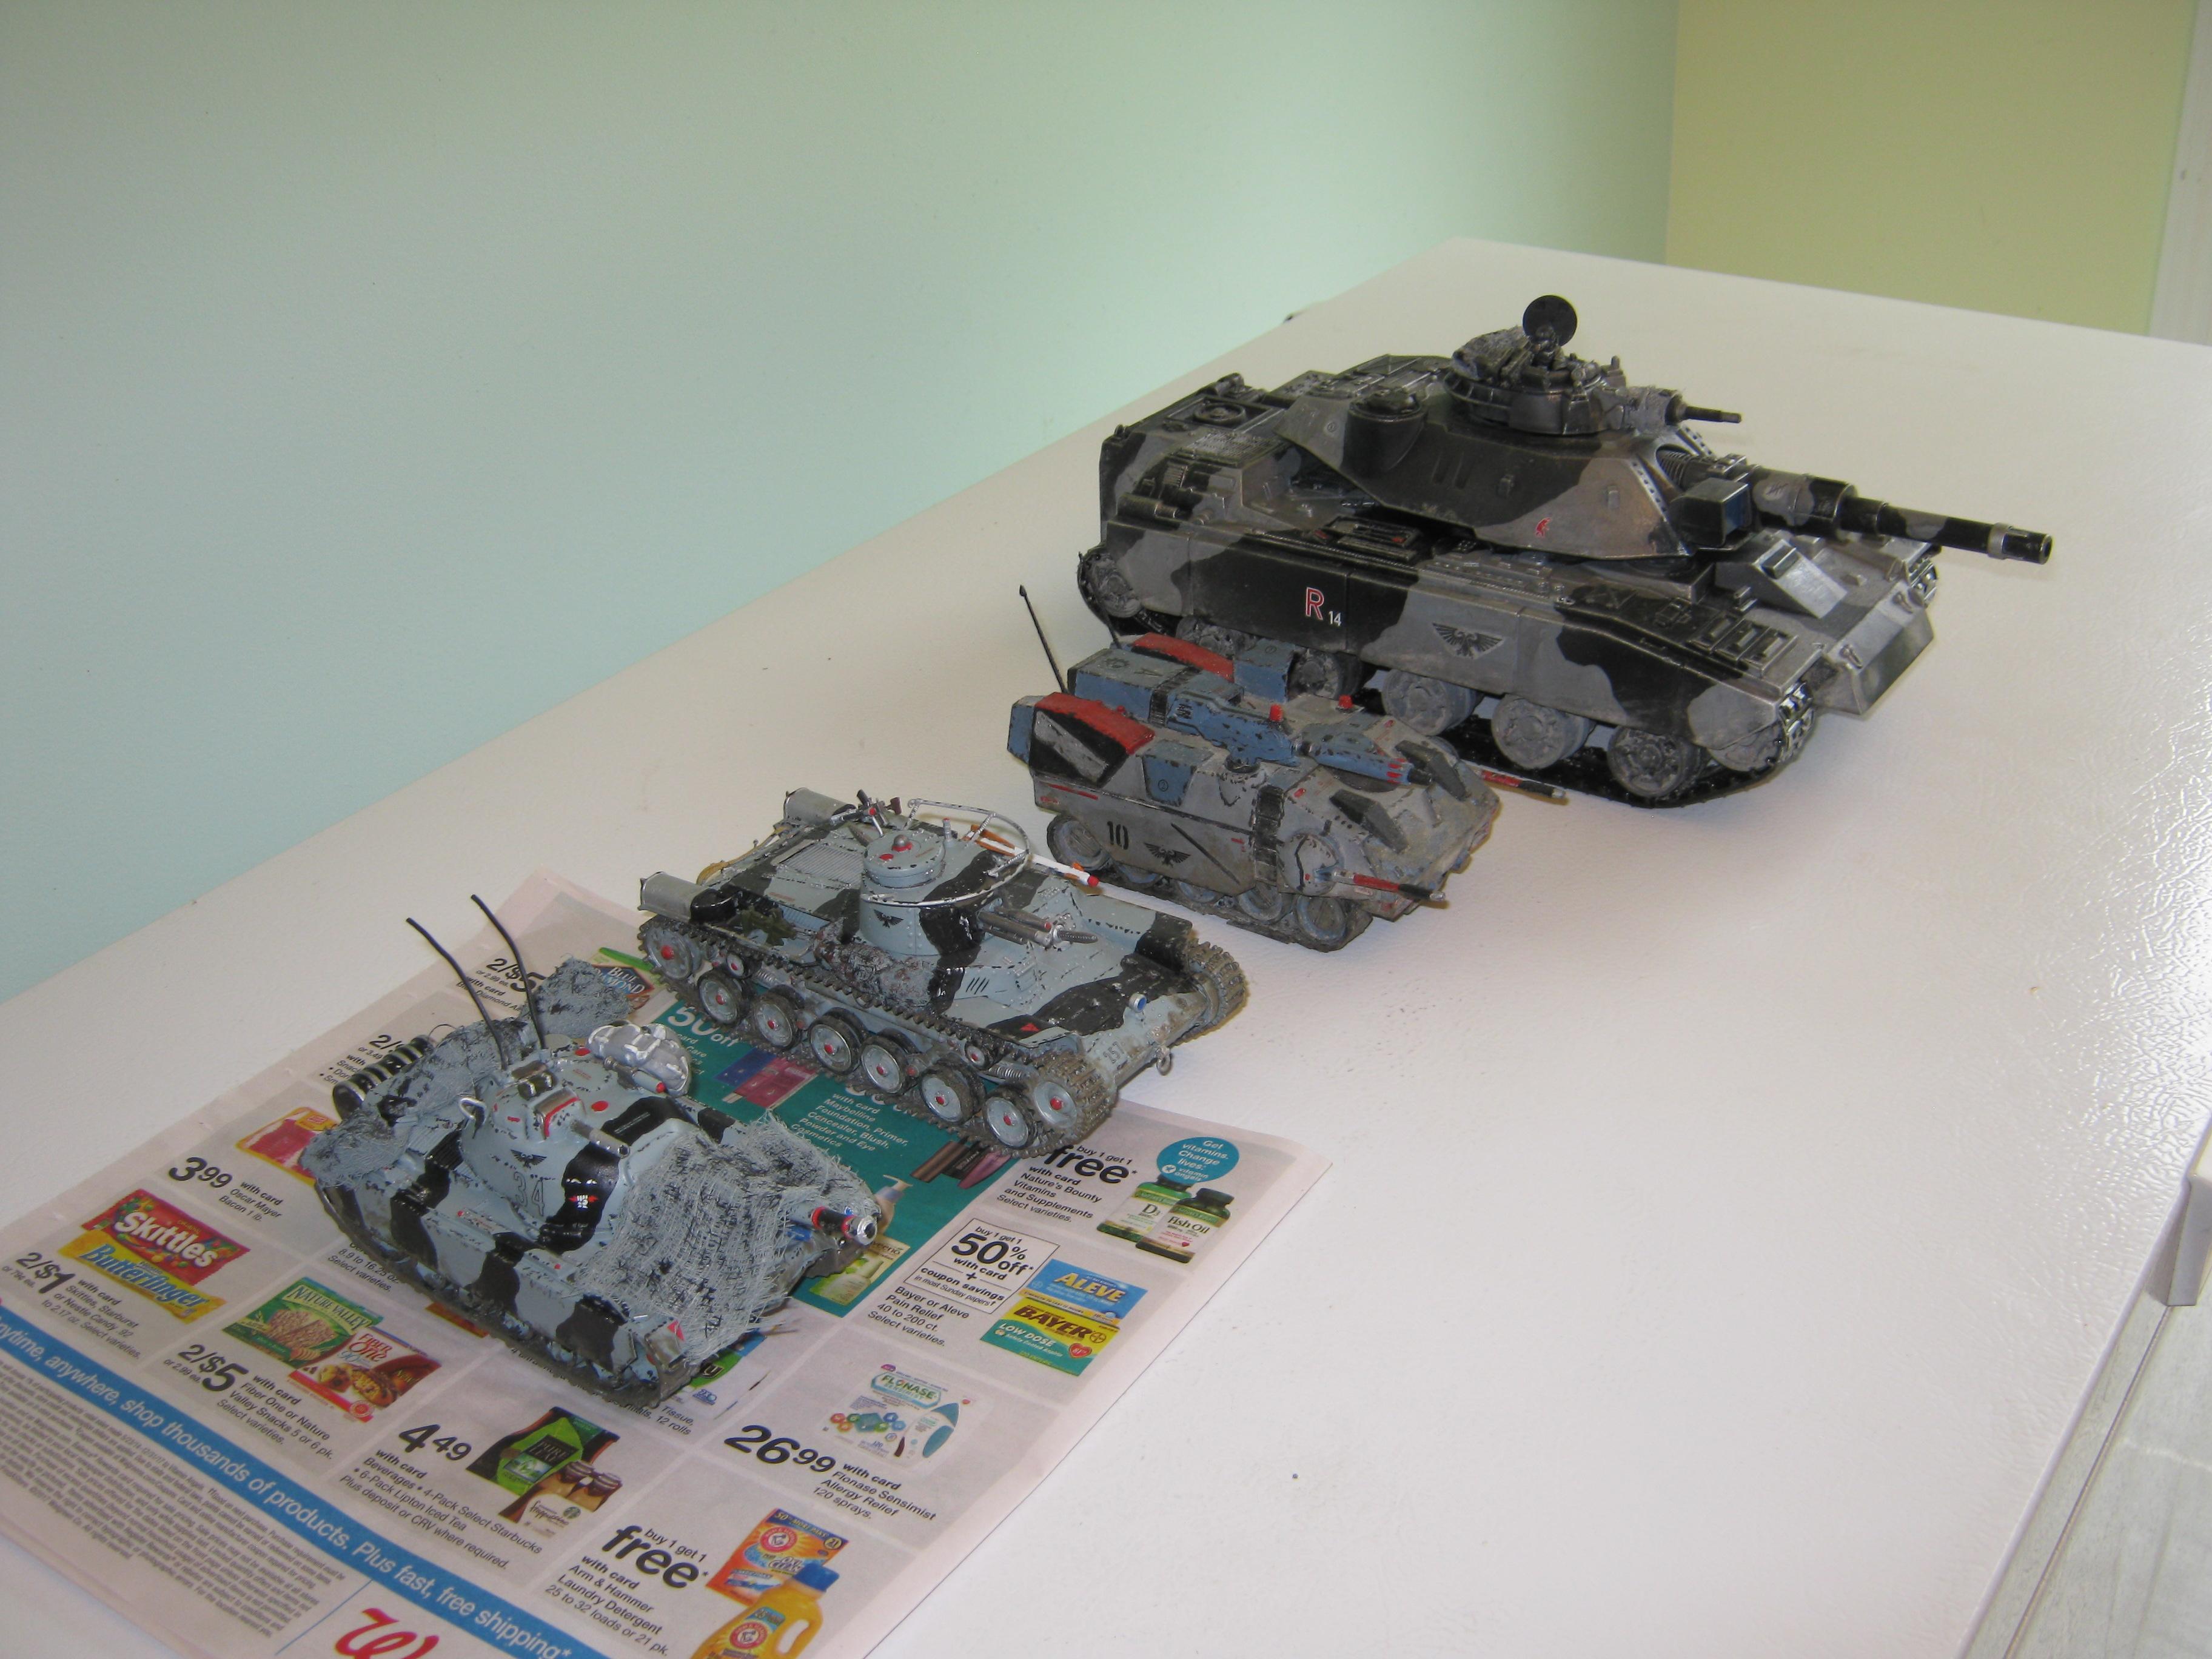 Conversion, Counts As, Imperial, Light Tank, M47, M48, Recon Vehicle, Scouts, Tank, Timmee Toys, Toy